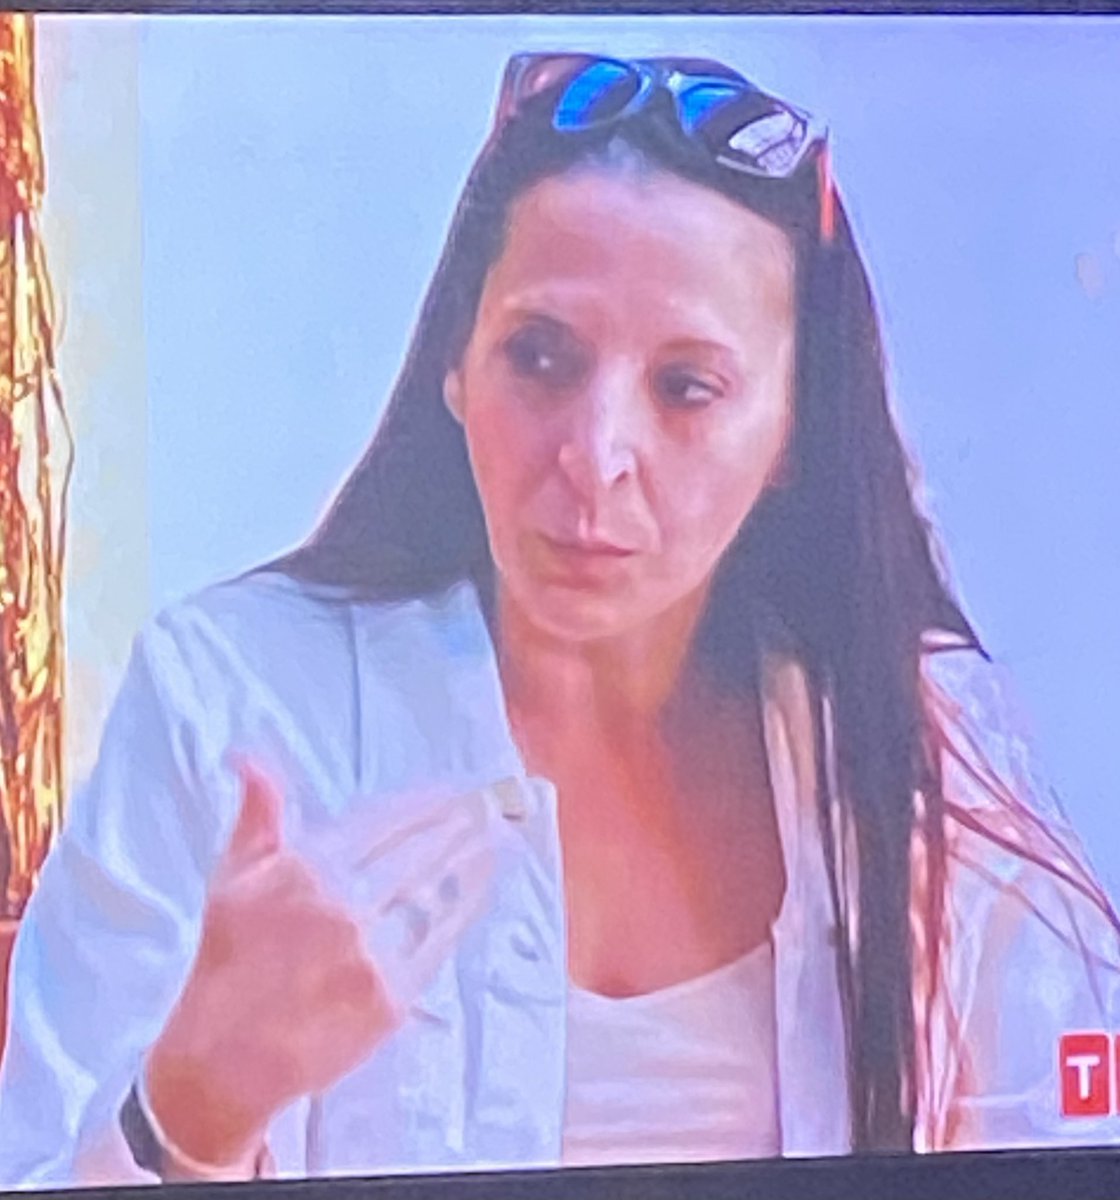 Gaslighting 101. While you were calling me out for my behavior I told you to stop cause I had no come back yet & you just kept on pointing out sh*t. #90DayFiance #90DaysFiance #90daytheotherway #90dayfiancetheotherway